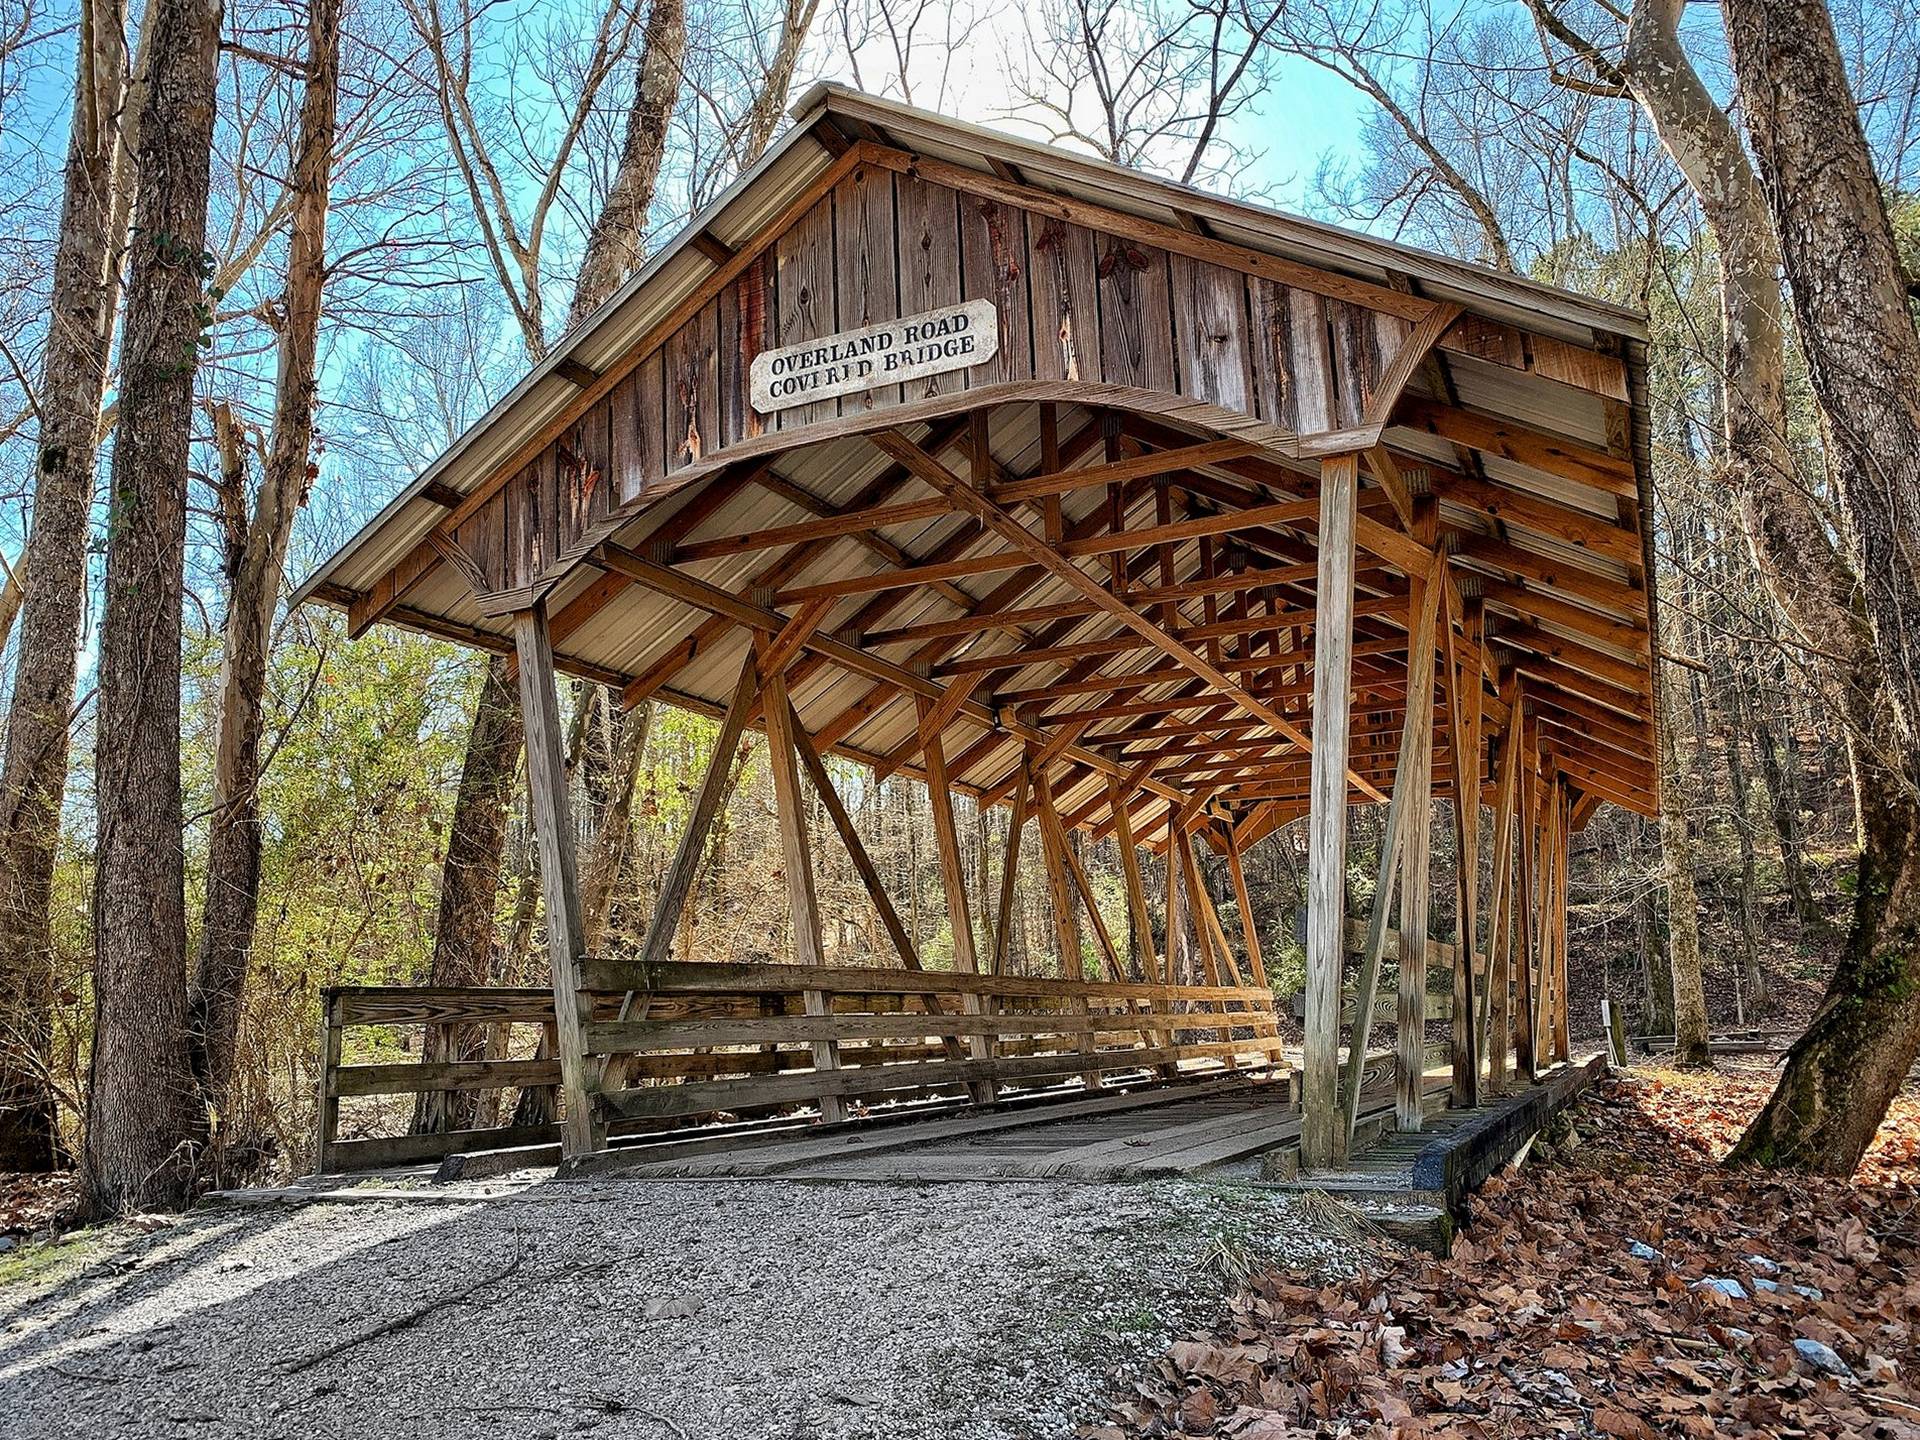 Overland Road Covered Bridge at Brierfield Ironworks State Park